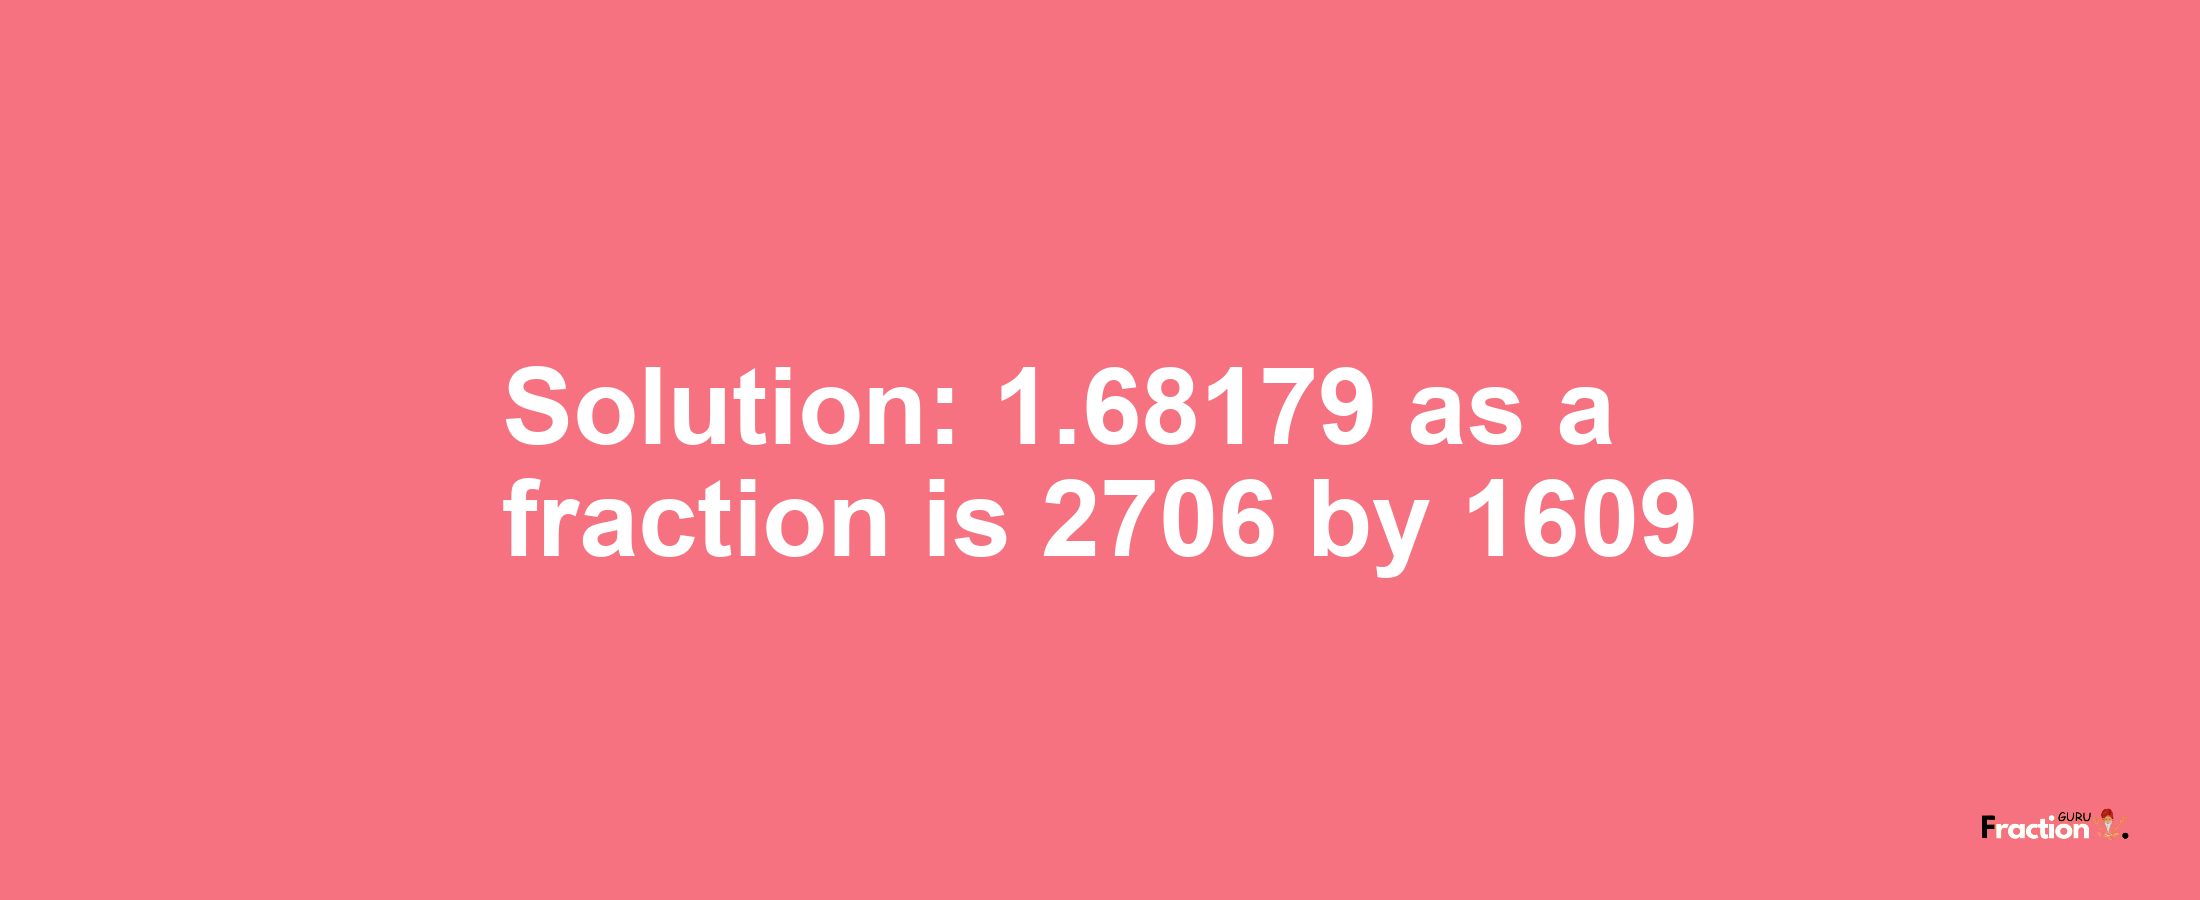 Solution:1.68179 as a fraction is 2706/1609